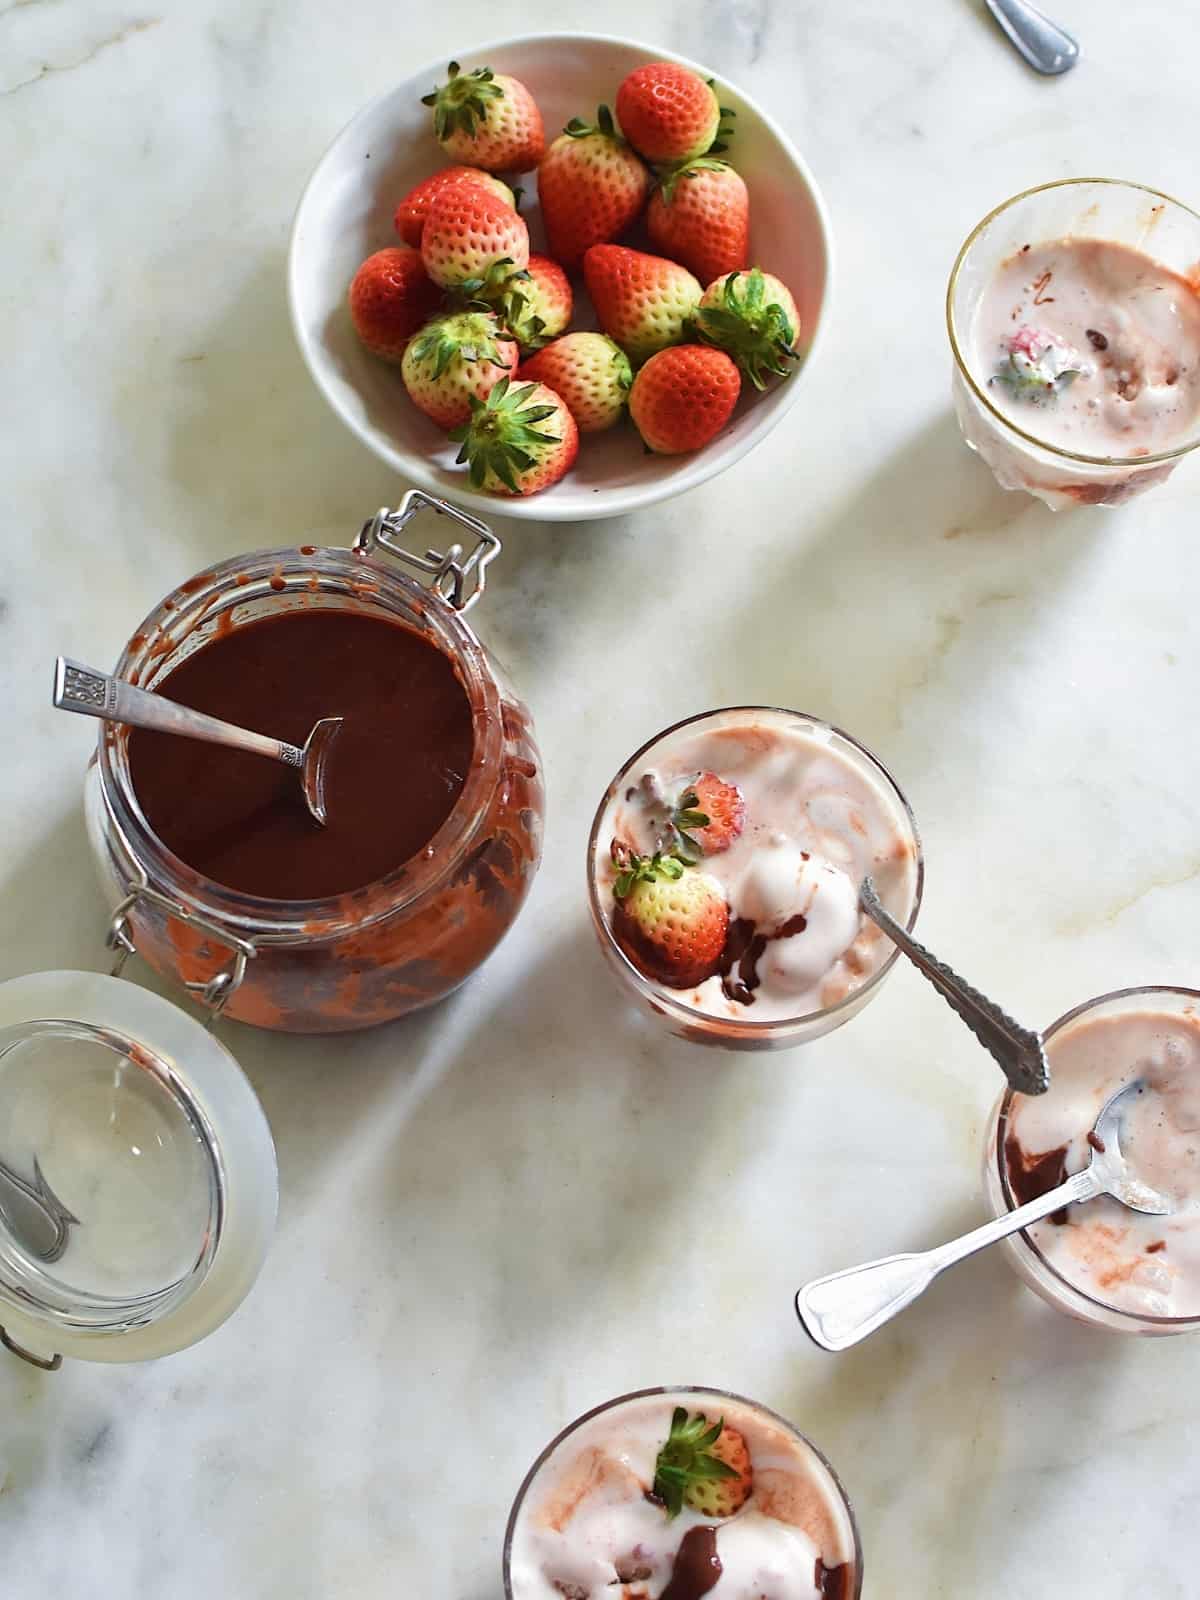 A glass jar of Hot fudge, together with a plate full of strawberries and hot fudge sundaes.